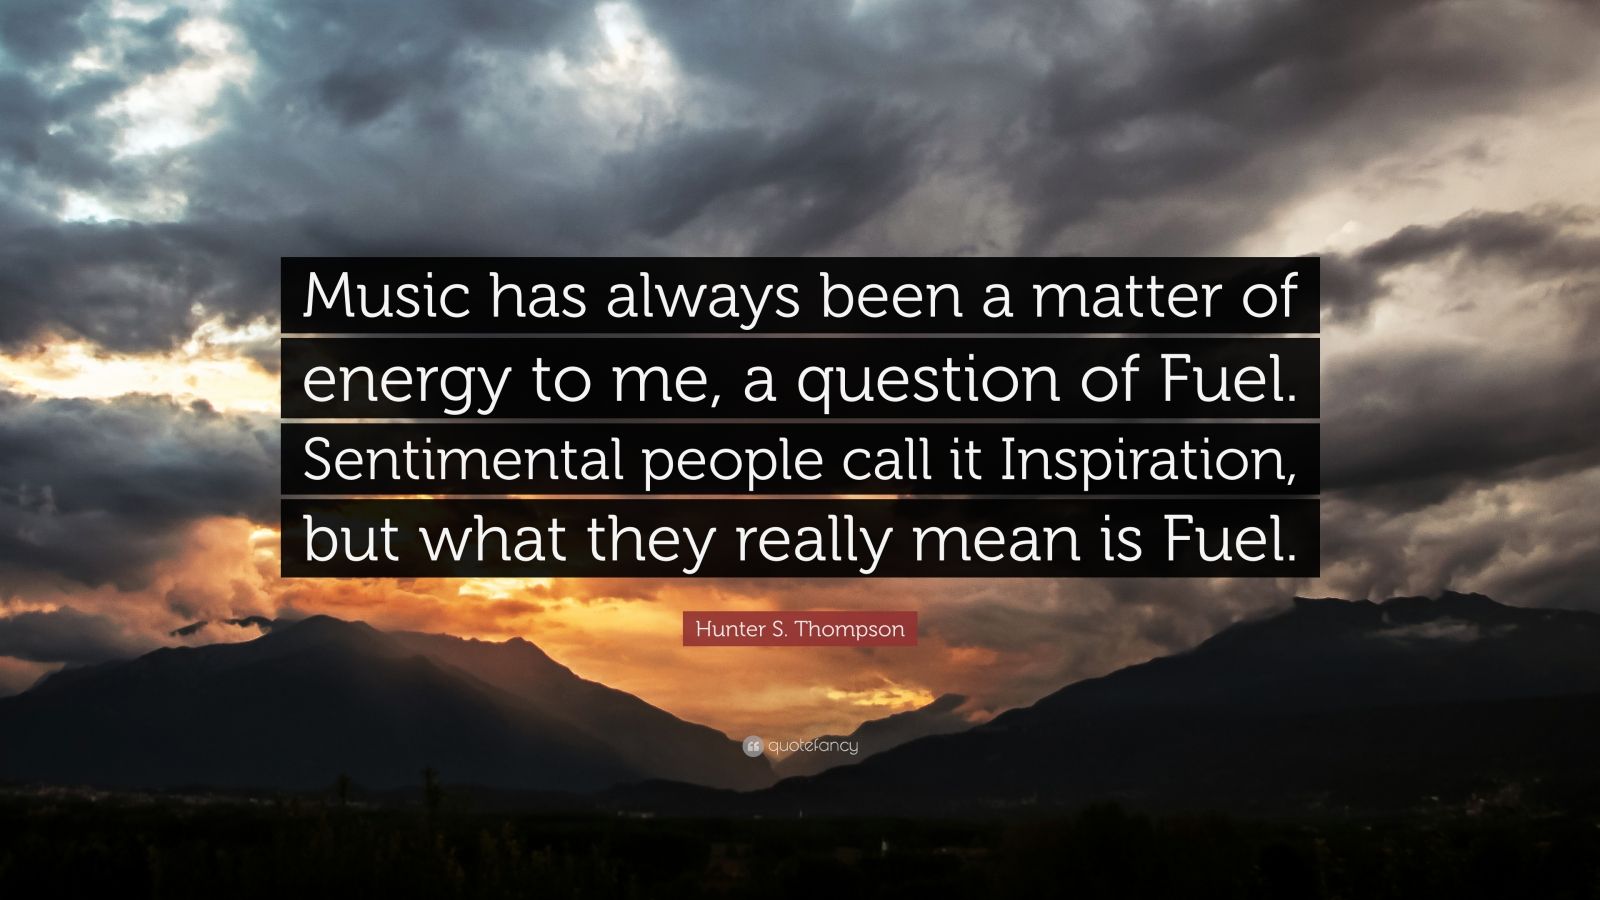 Hunter S. Thompson Quote: “Music has always been a matter of energy to